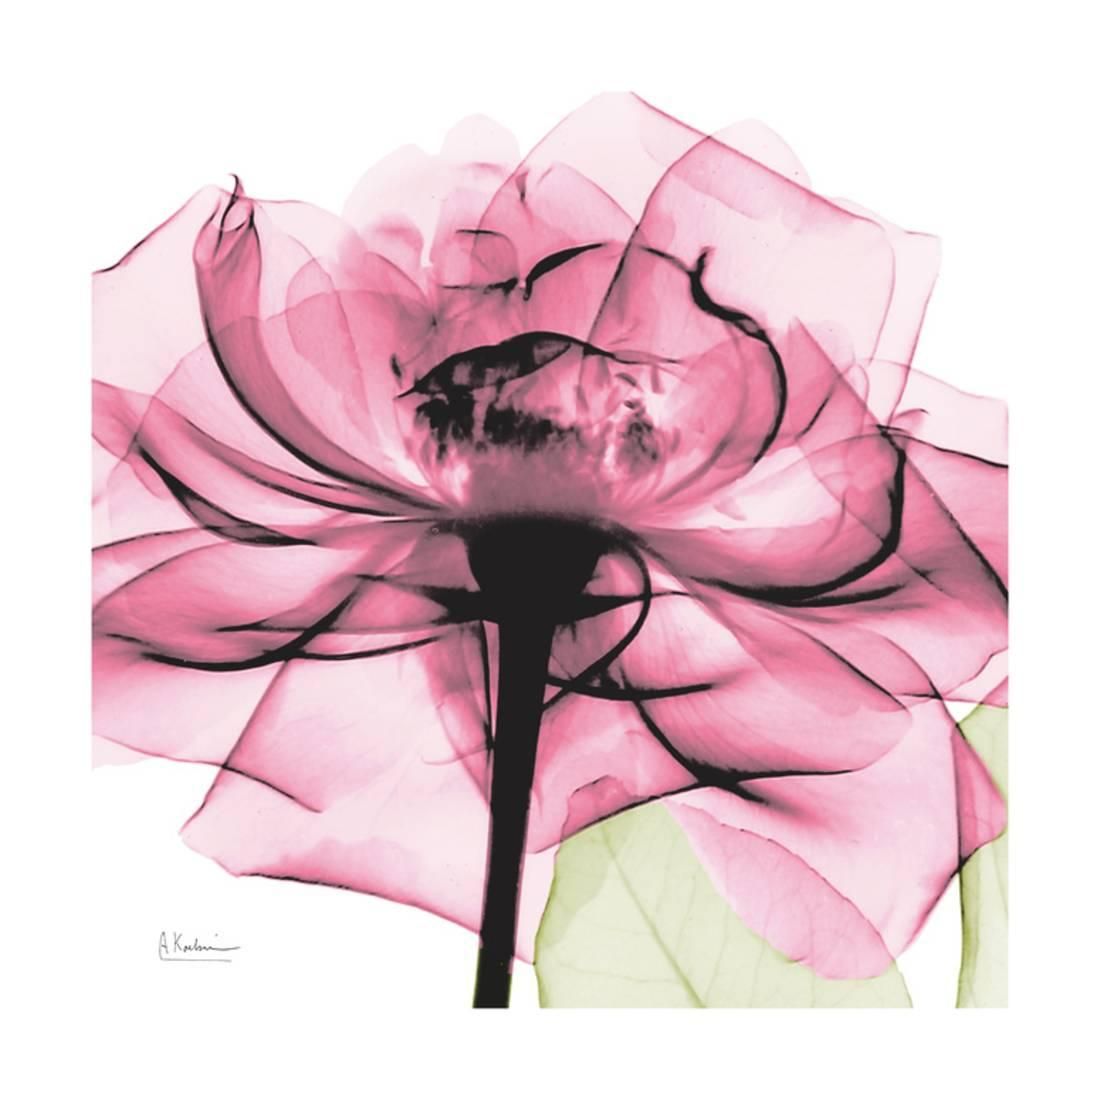 Rose Pink Pink Flower X Ray Photo Print Wall Artalbert Intended For Flowers Wall Art (View 11 of 15)